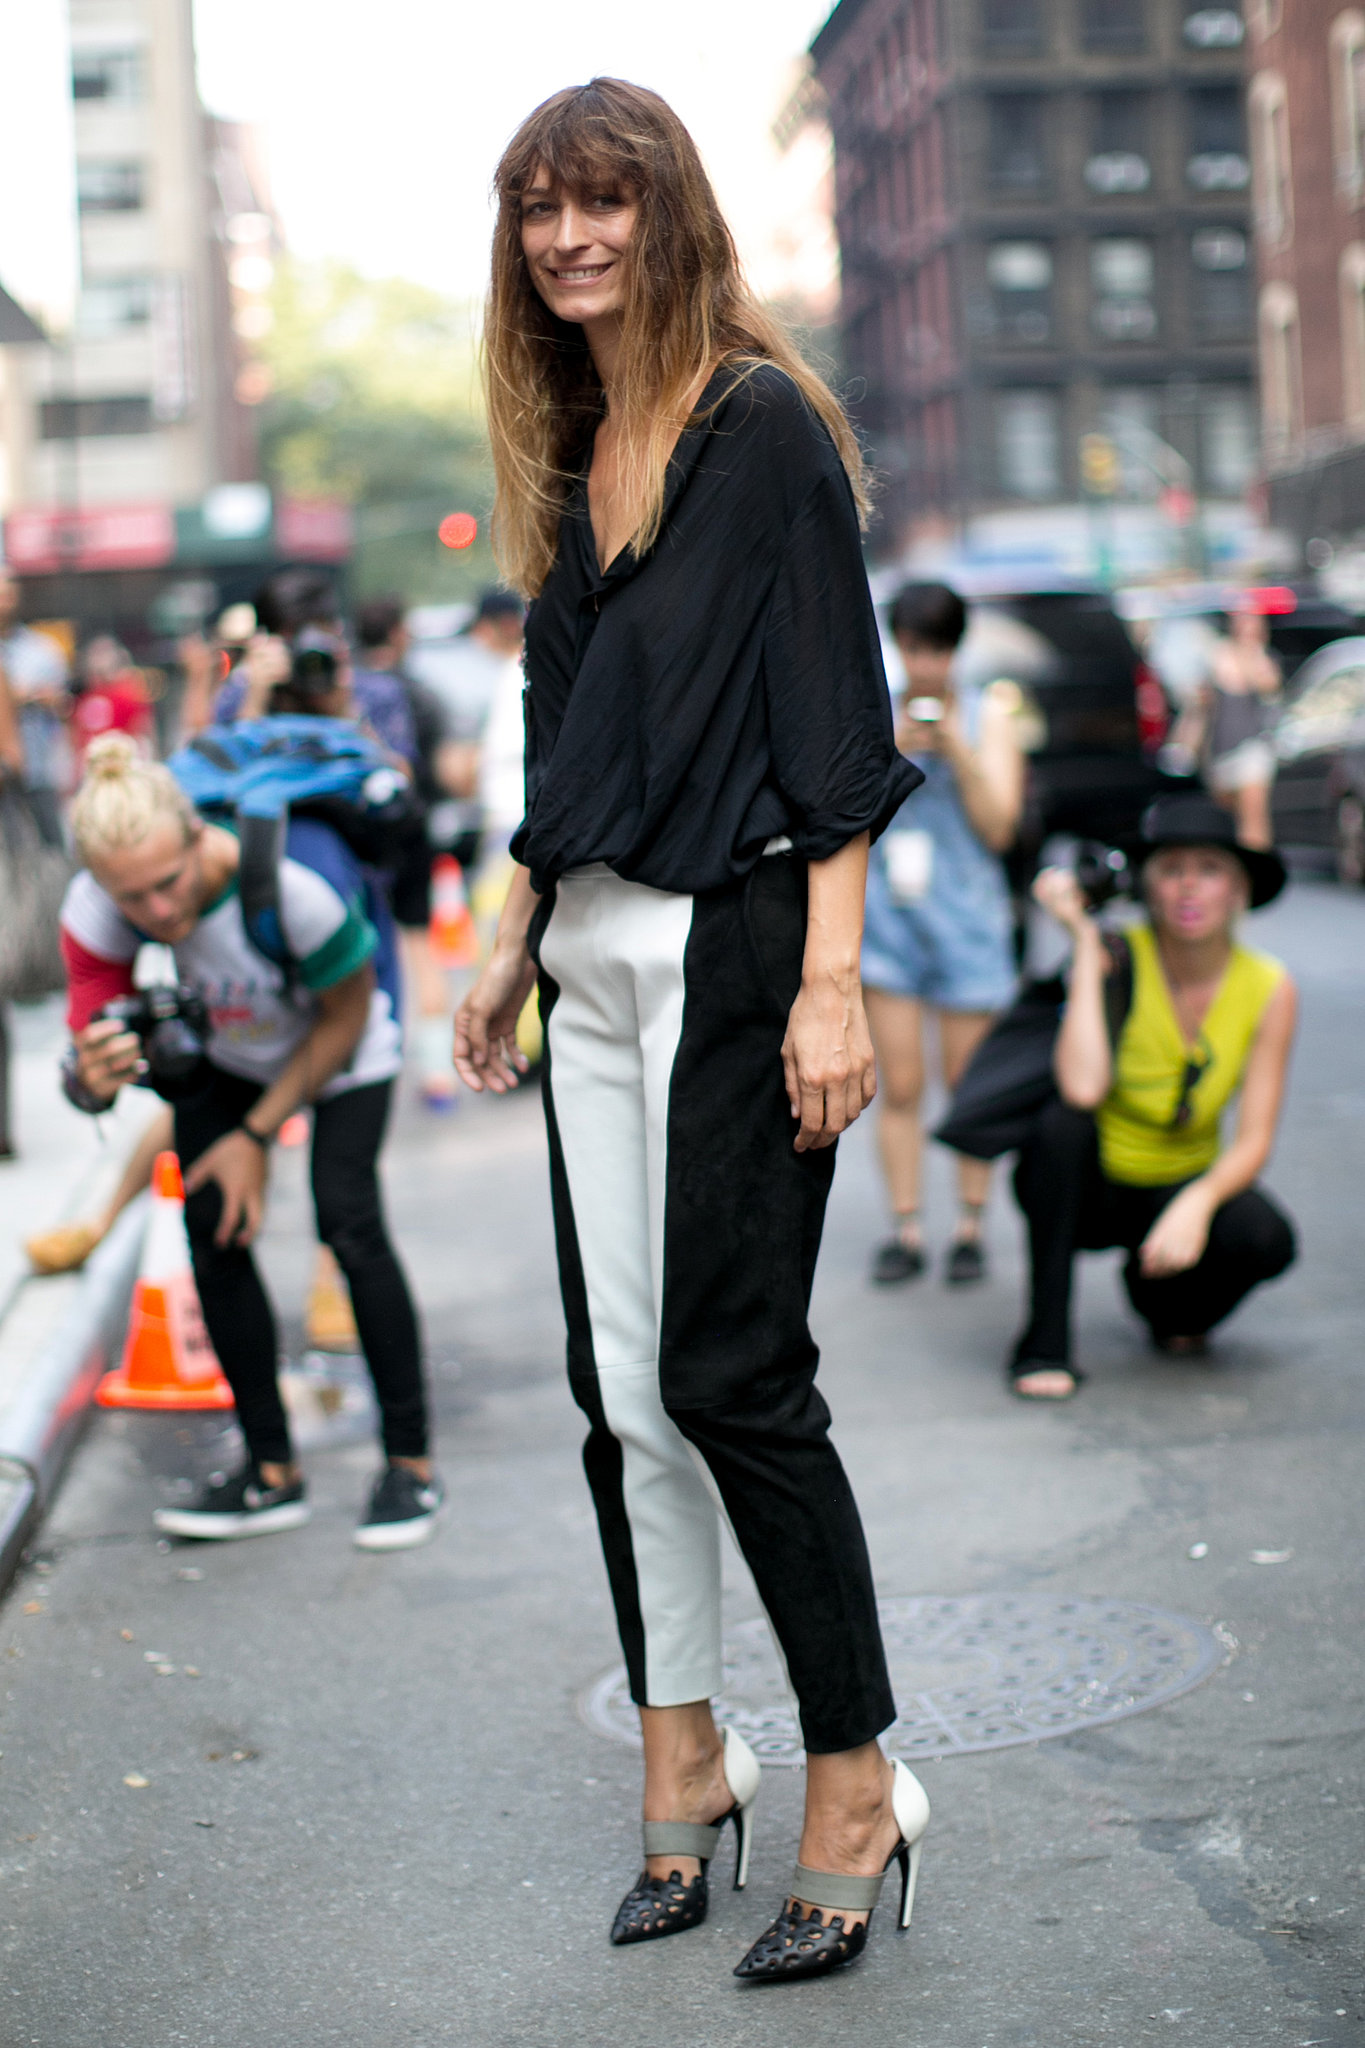 Black and white and utterly chic.
